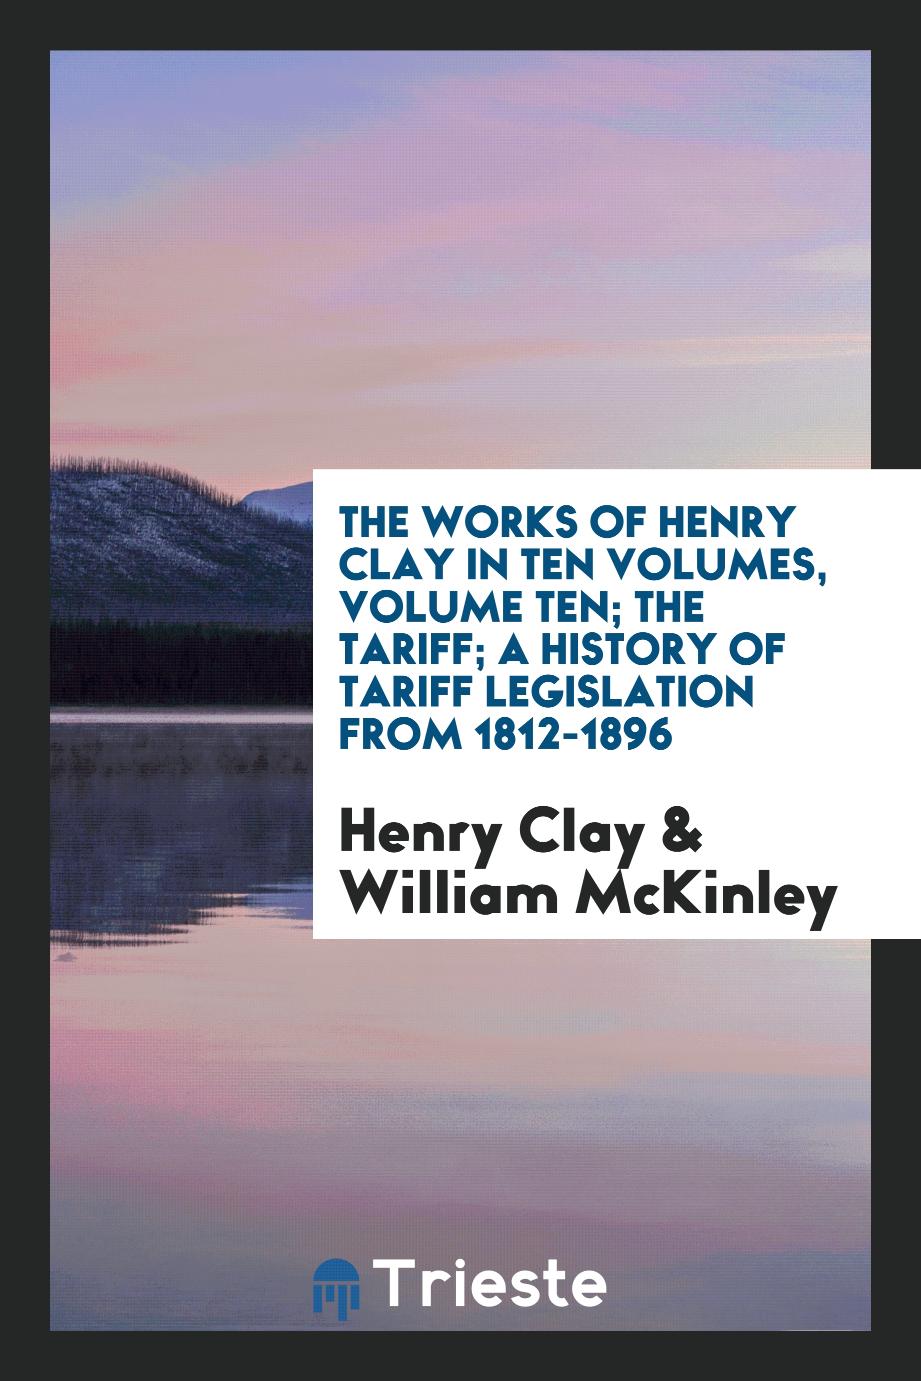 The Works of Henry Clay in Ten Volumes, Volume Ten; The Tariff; A History of Tariff Legislation from 1812-1896